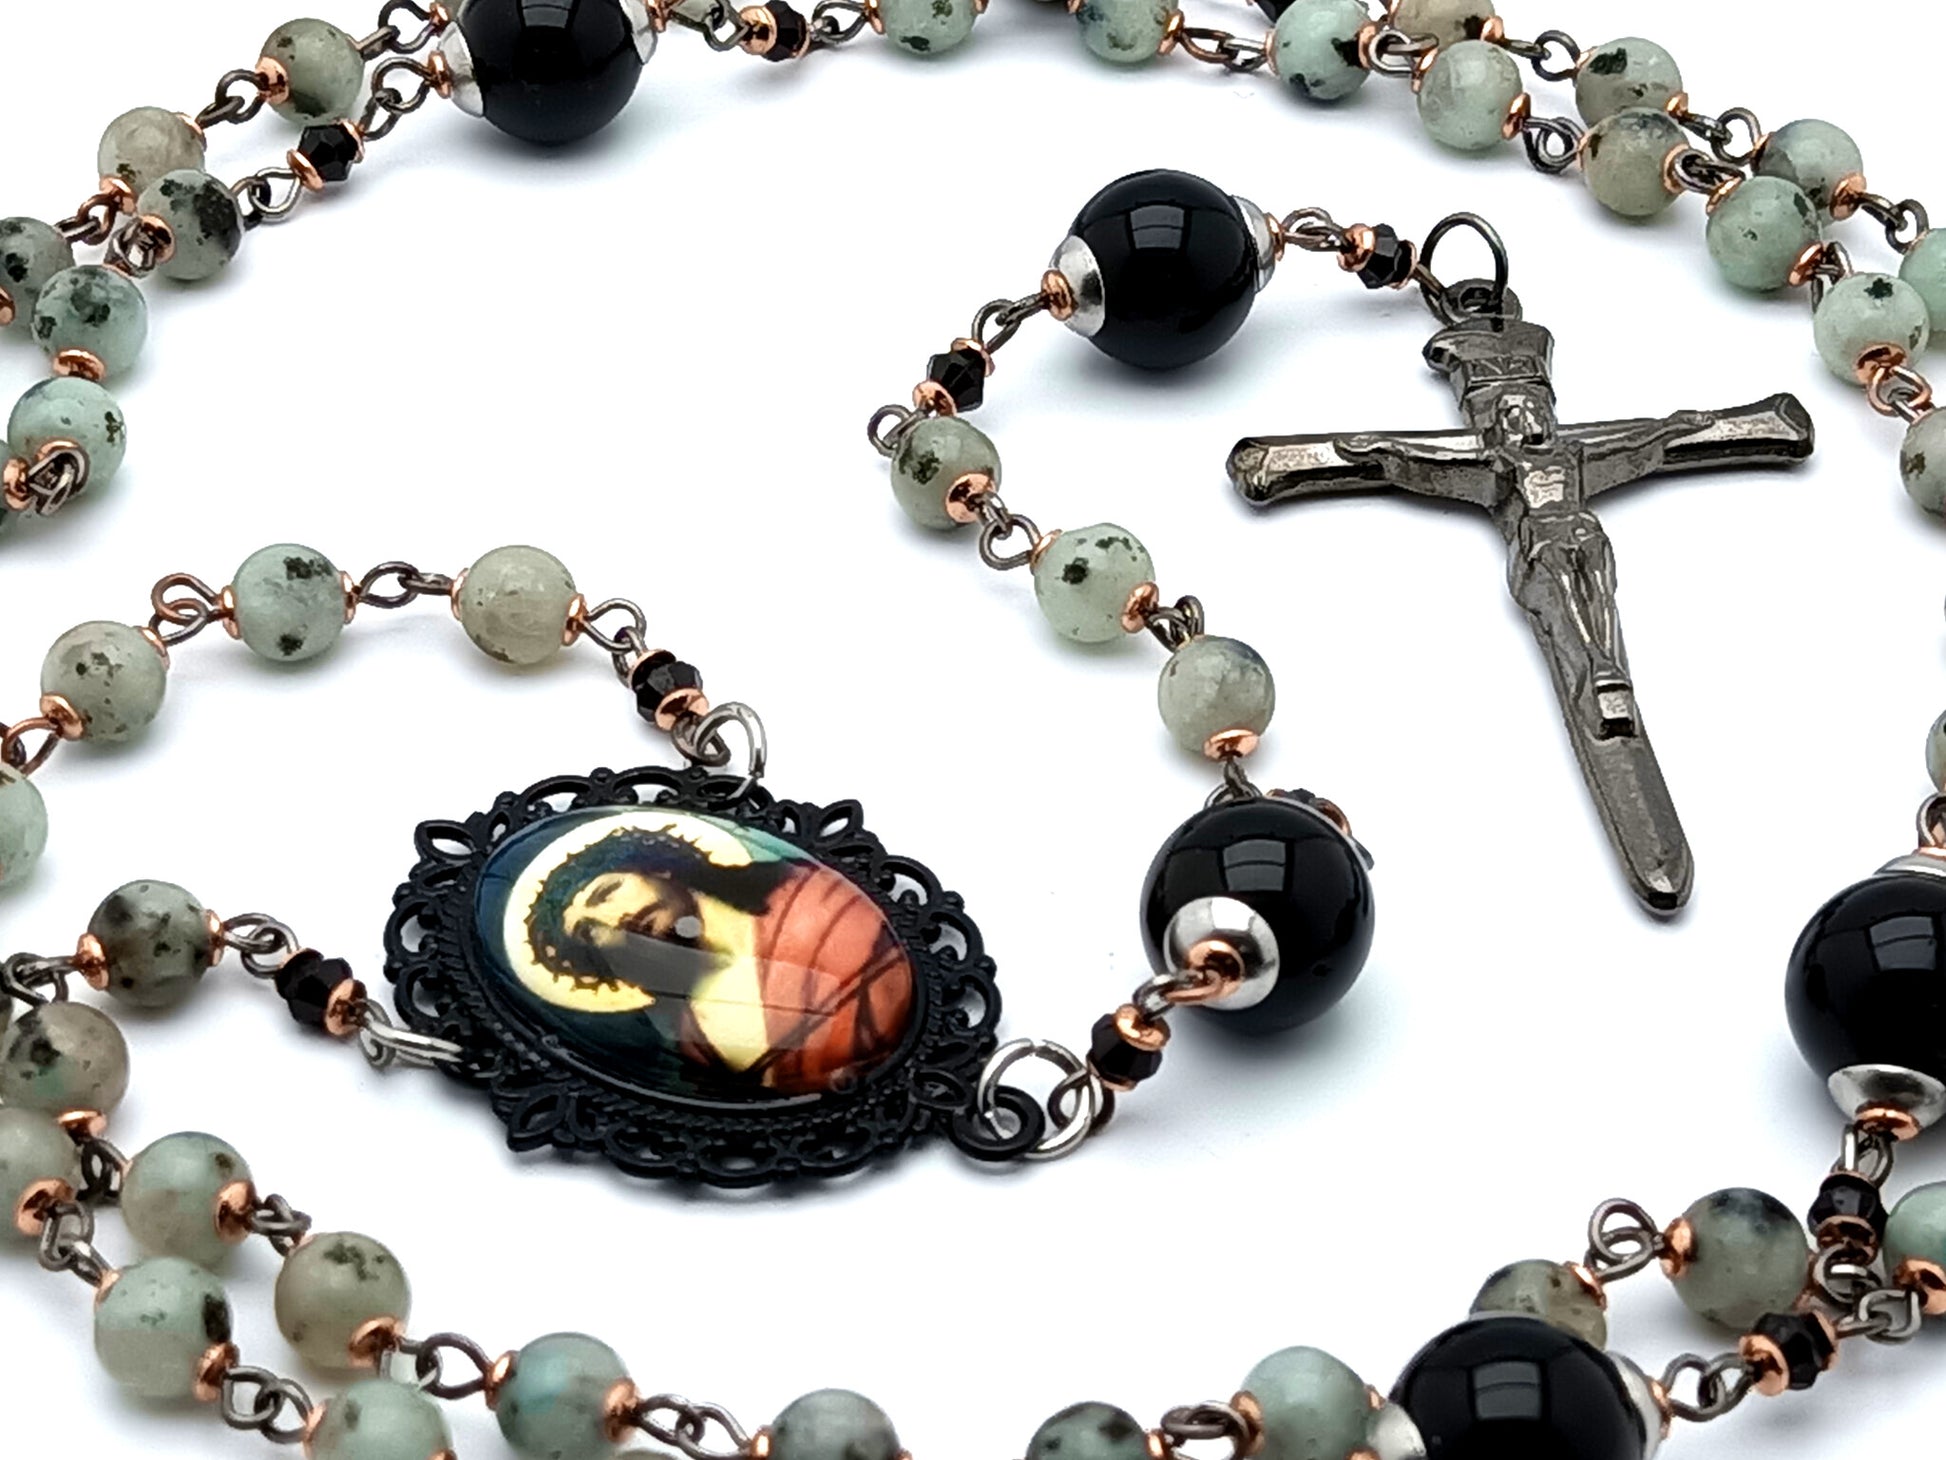 The Crowning of Thorns unique rosary beads with jasper and onyx gemstone beads and nail design crucifix.